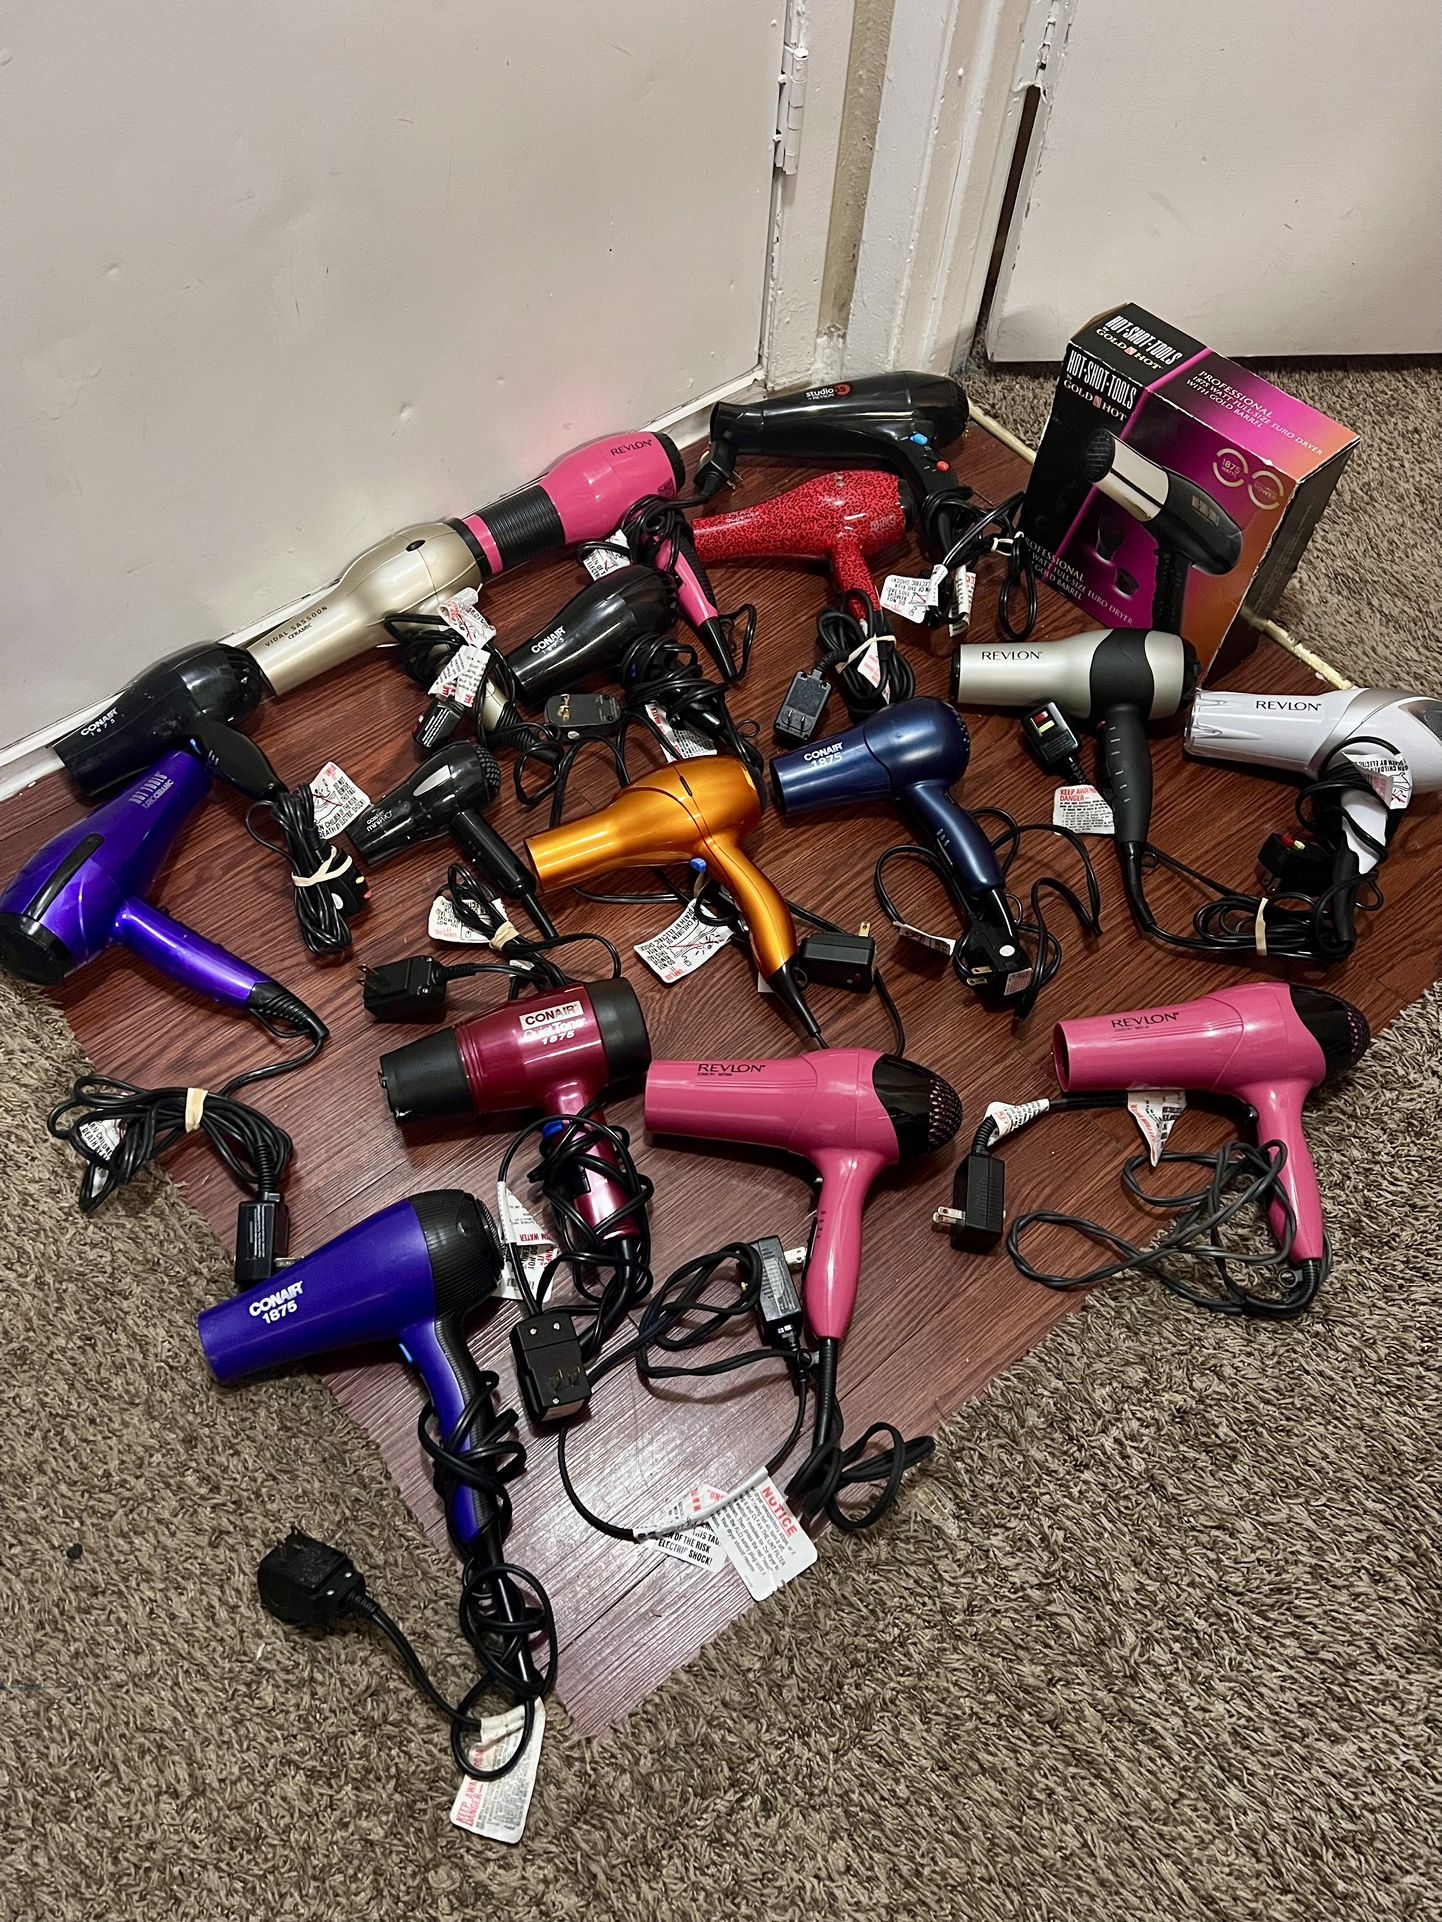 Hair Dryers Like New 12$ For Each 